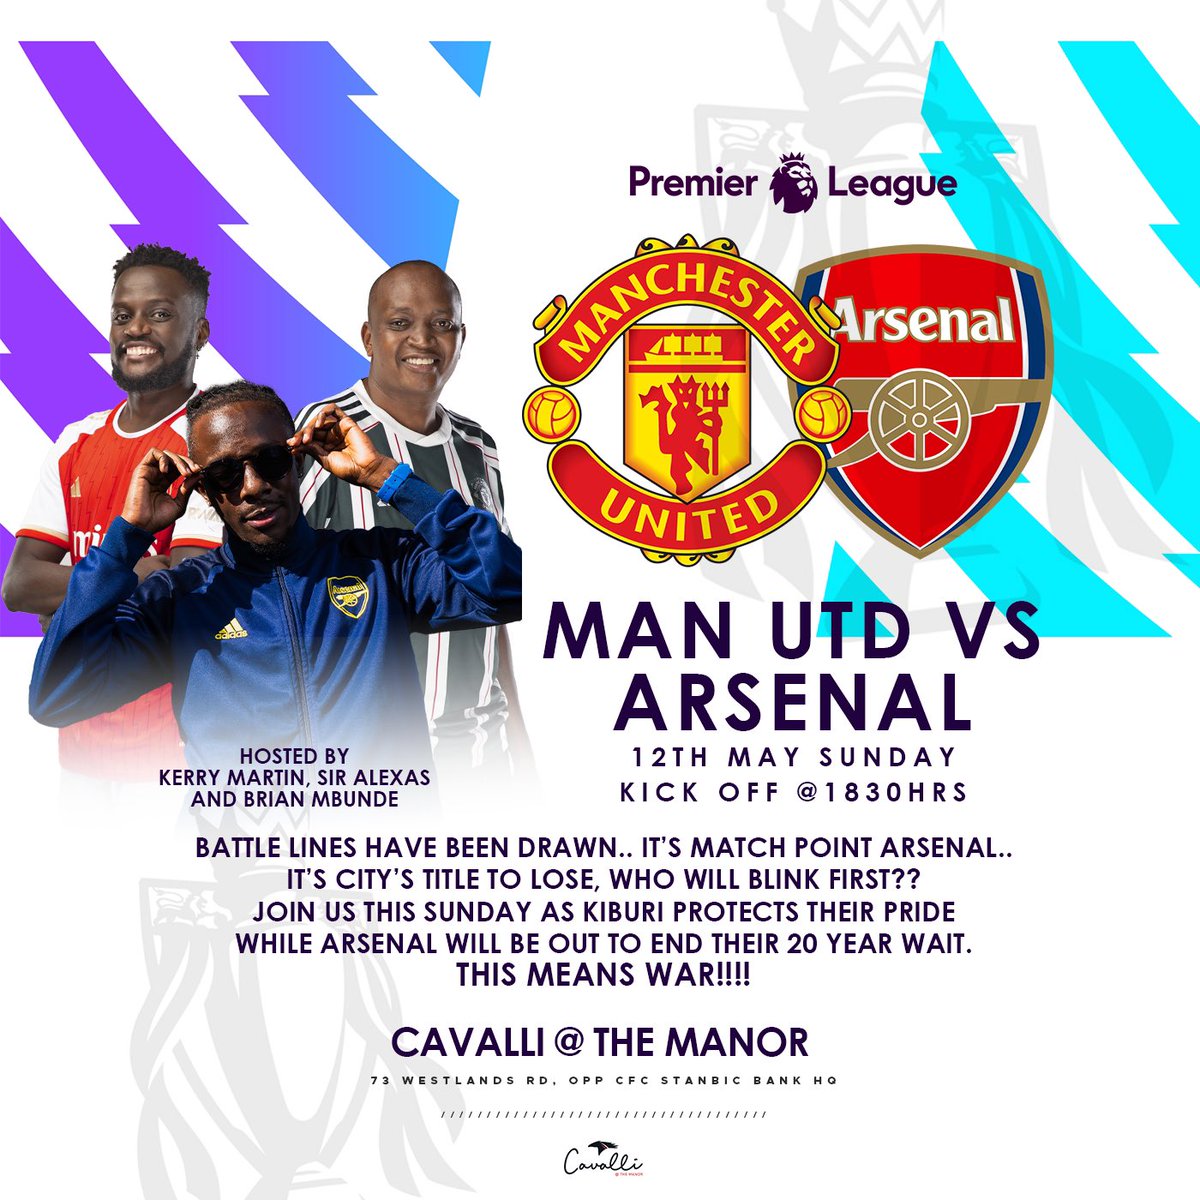 This Sunday, ni @Brianmbunde tutacheka ama ni Bwana Gilbeys @SirAlexas ?? Come through and let’s have some fun and banter, who will go home smiling??